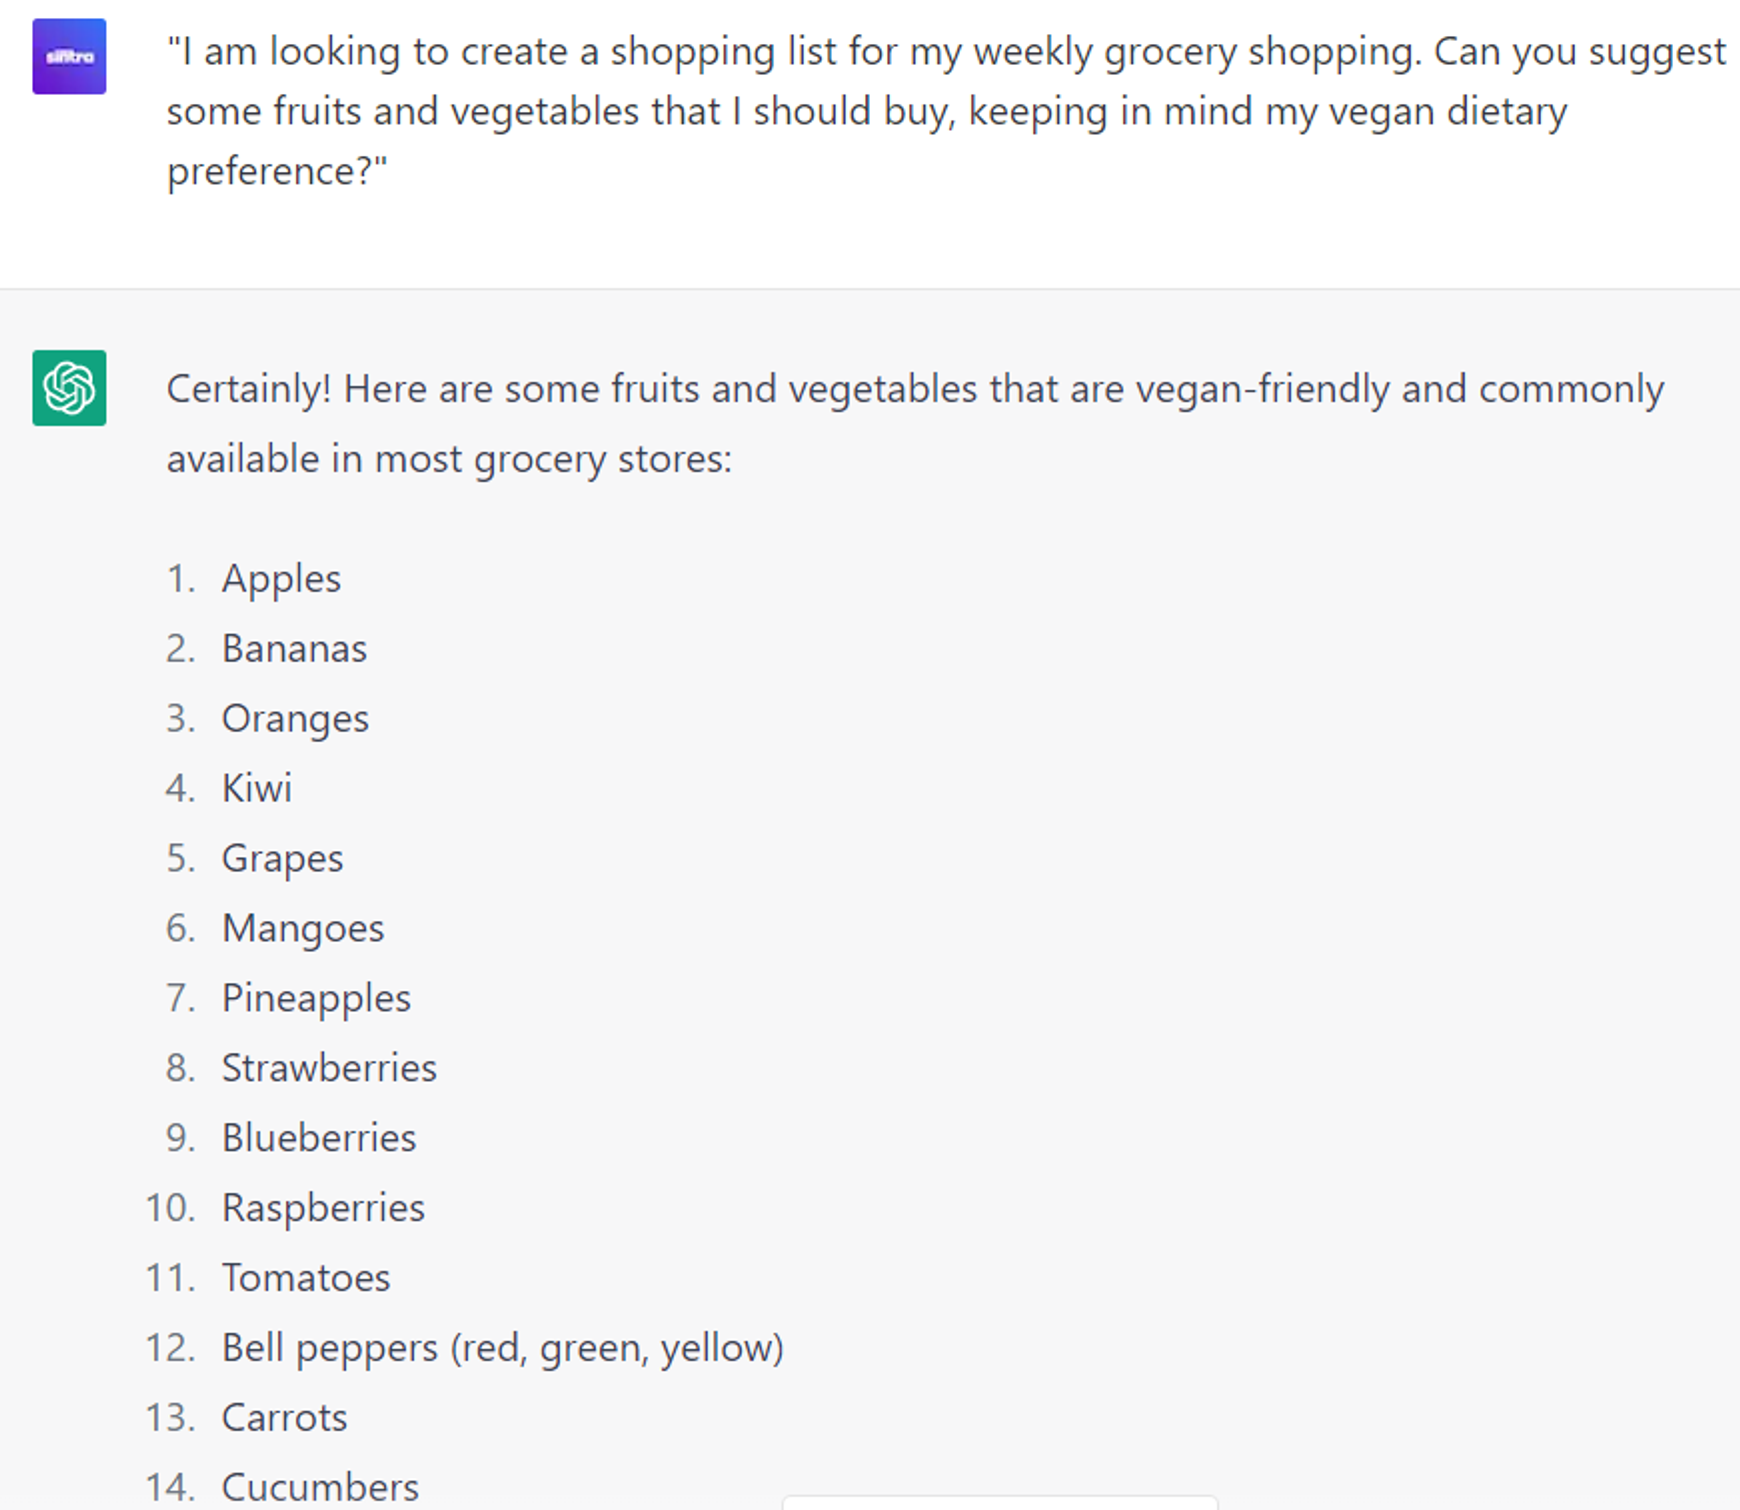  6 Innovative ChatGPT Prompts: Create shopping list